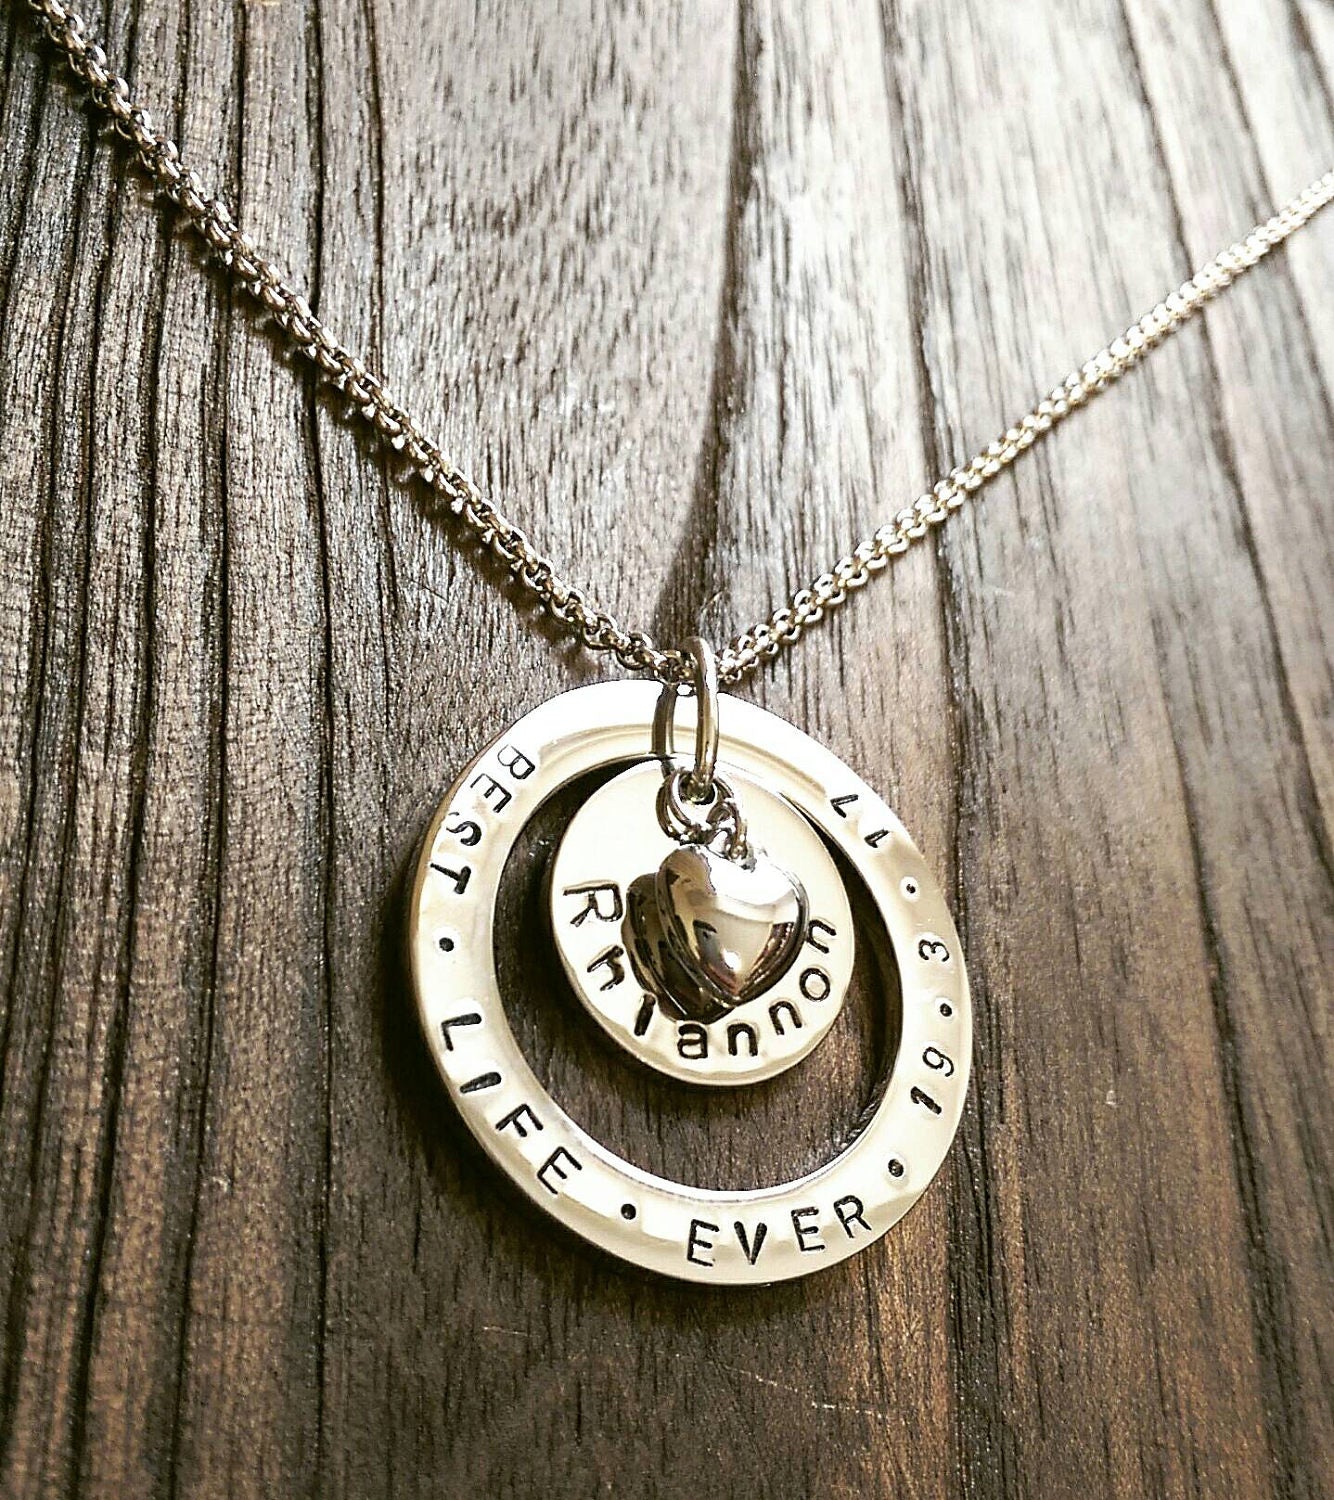 Personalised Hand Stamped Name Necklace add names or words with Heart charm - Silver and Resin Designs